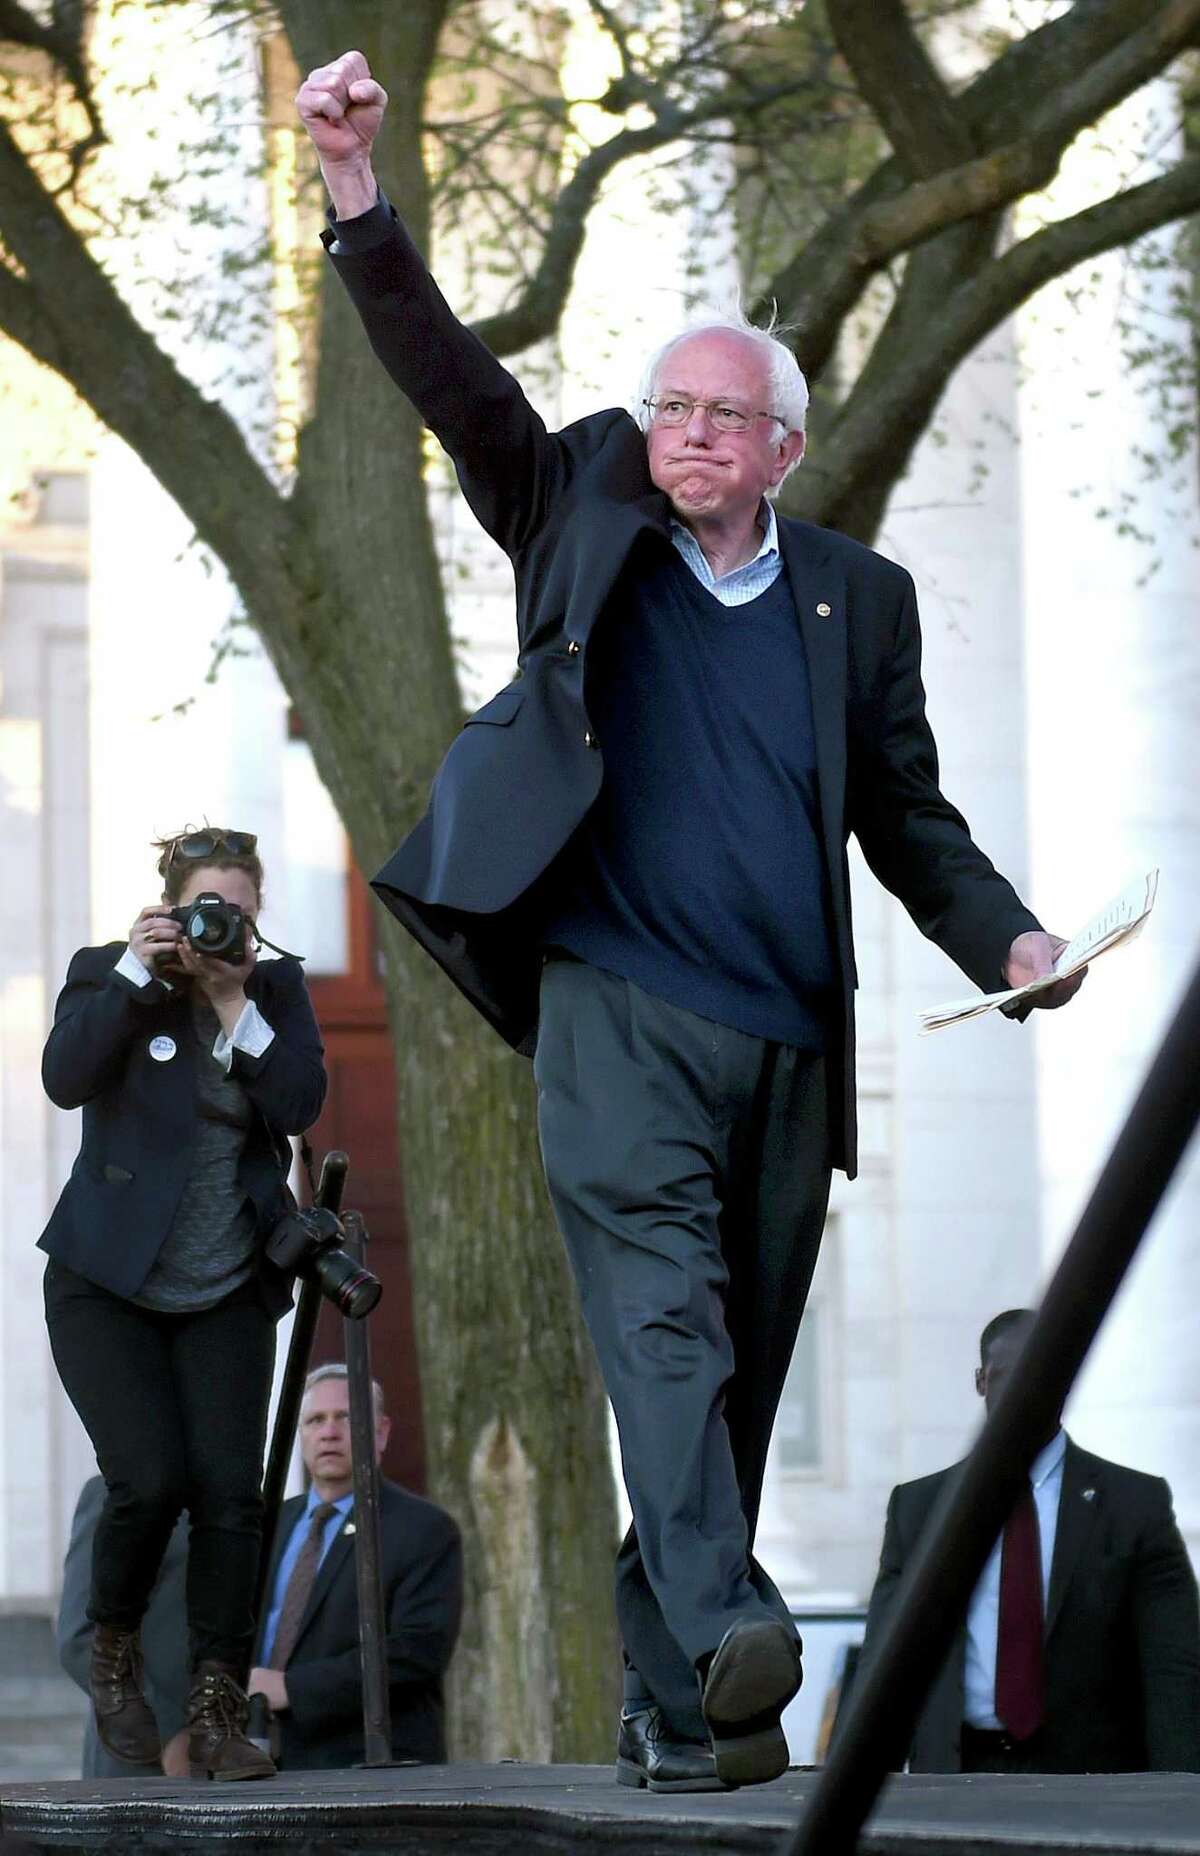 (Arnold Gold-New Haven Register) Democratic presidential candidate Bernie Sanders walks on stage for a rally on the New Haven Green on 4/24/2016.